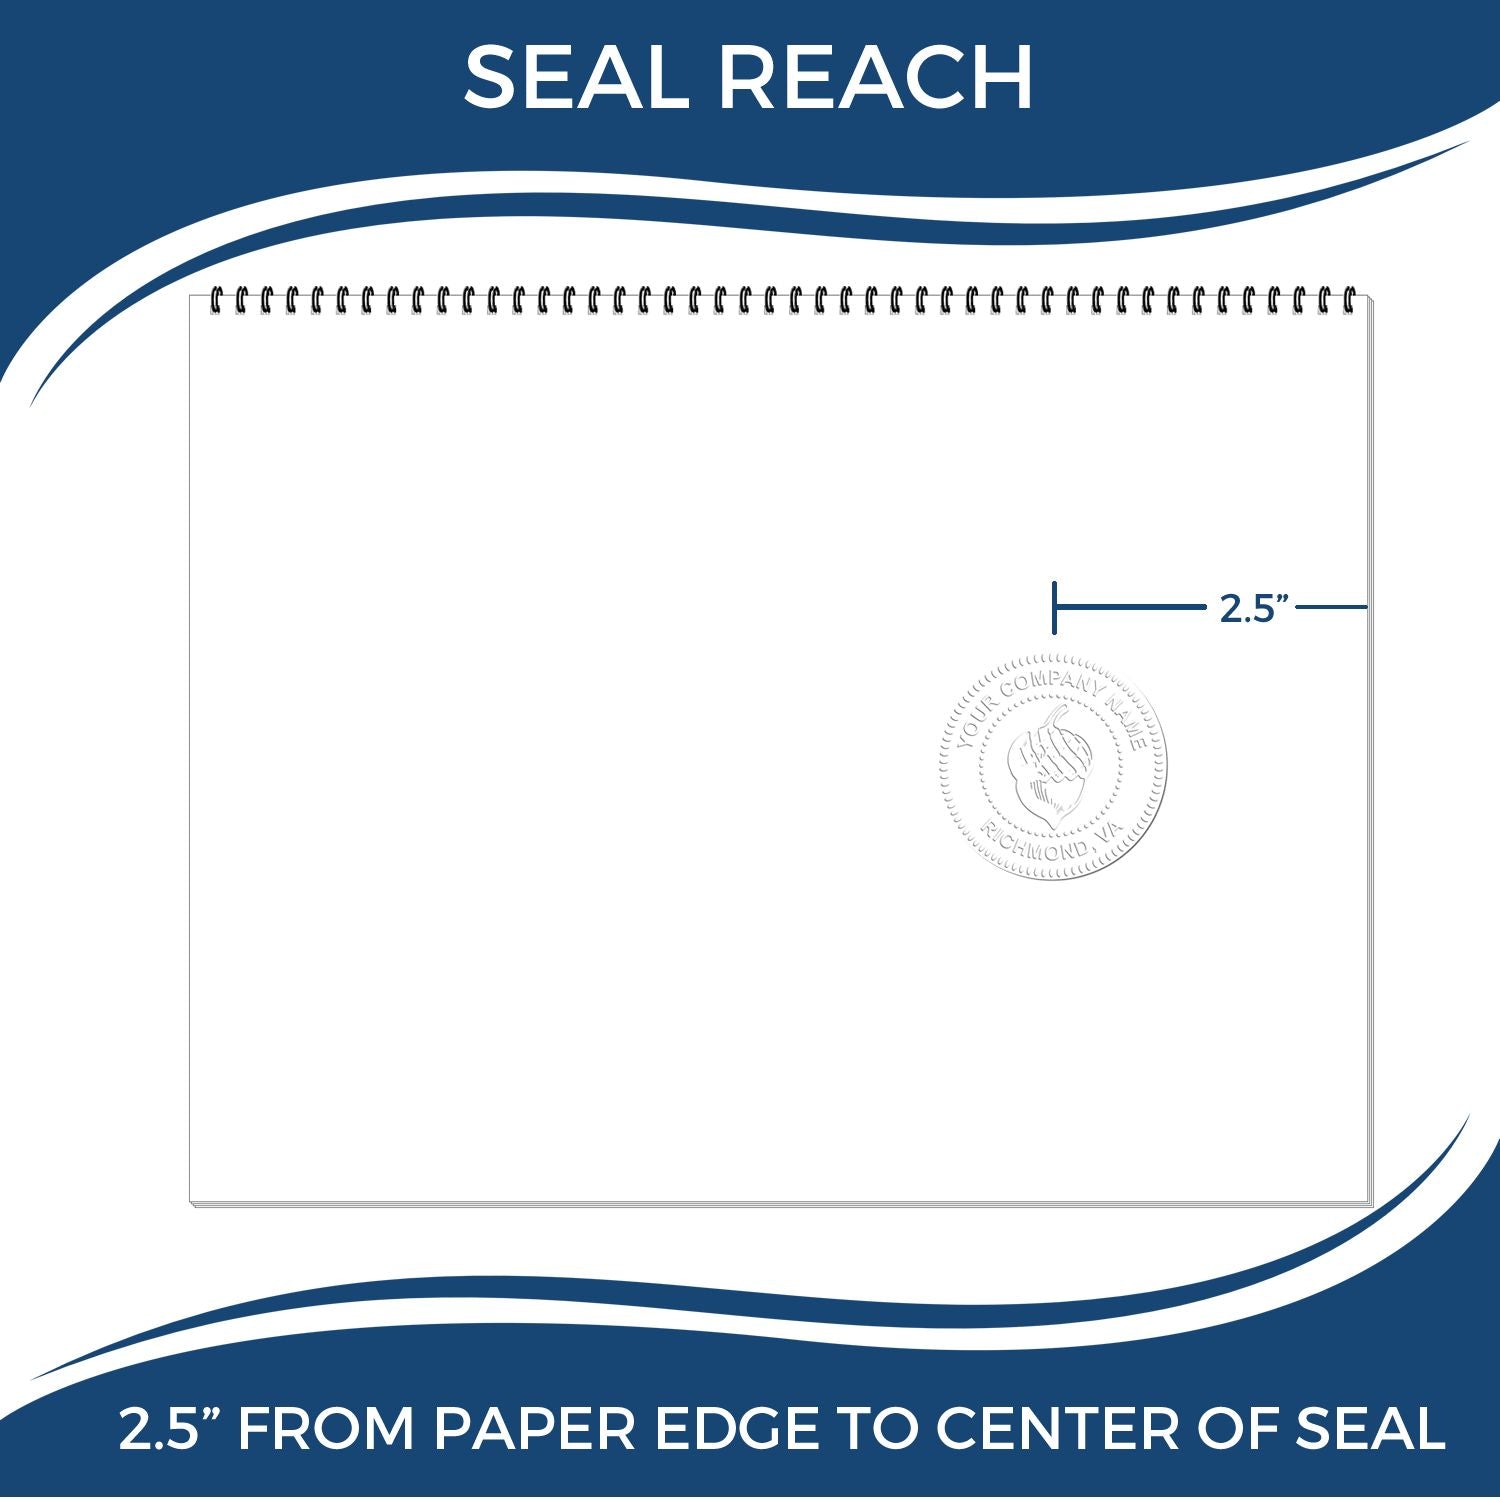 An infographic showing the seal reach which is represented by a ruler and a miniature seal image of the Long Reach Hawaii Land Surveyor Seal